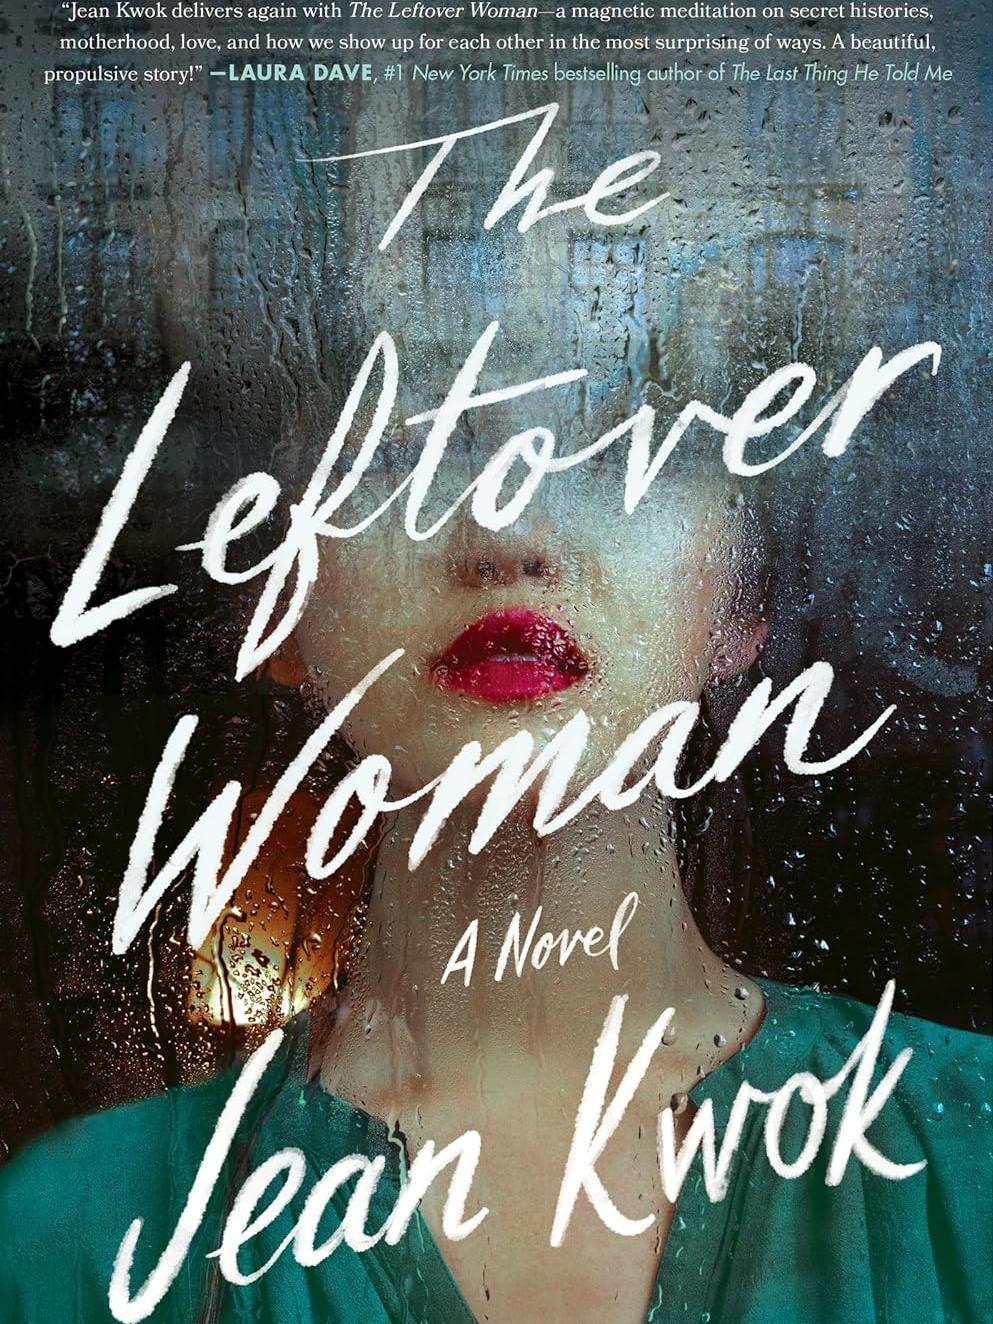 THE LEFTOVER WOMAN